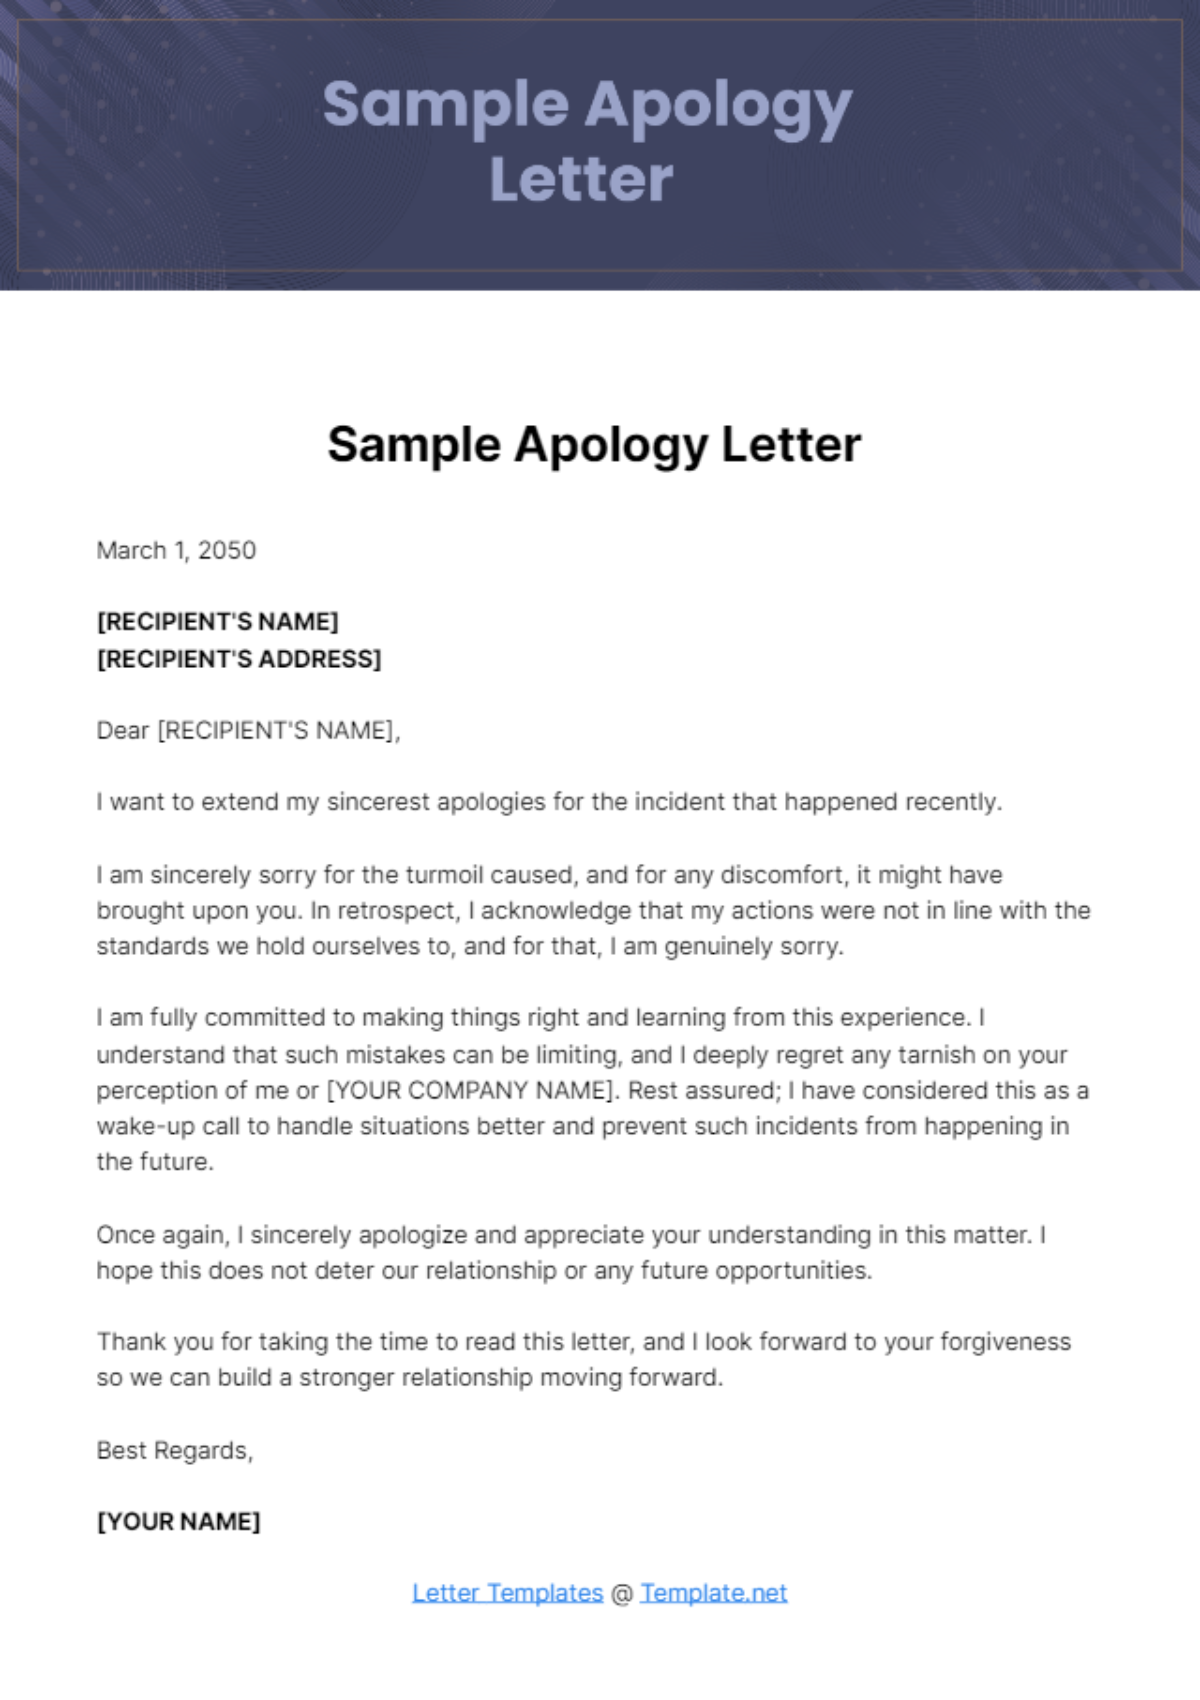 Free Sample Apology Letter Template